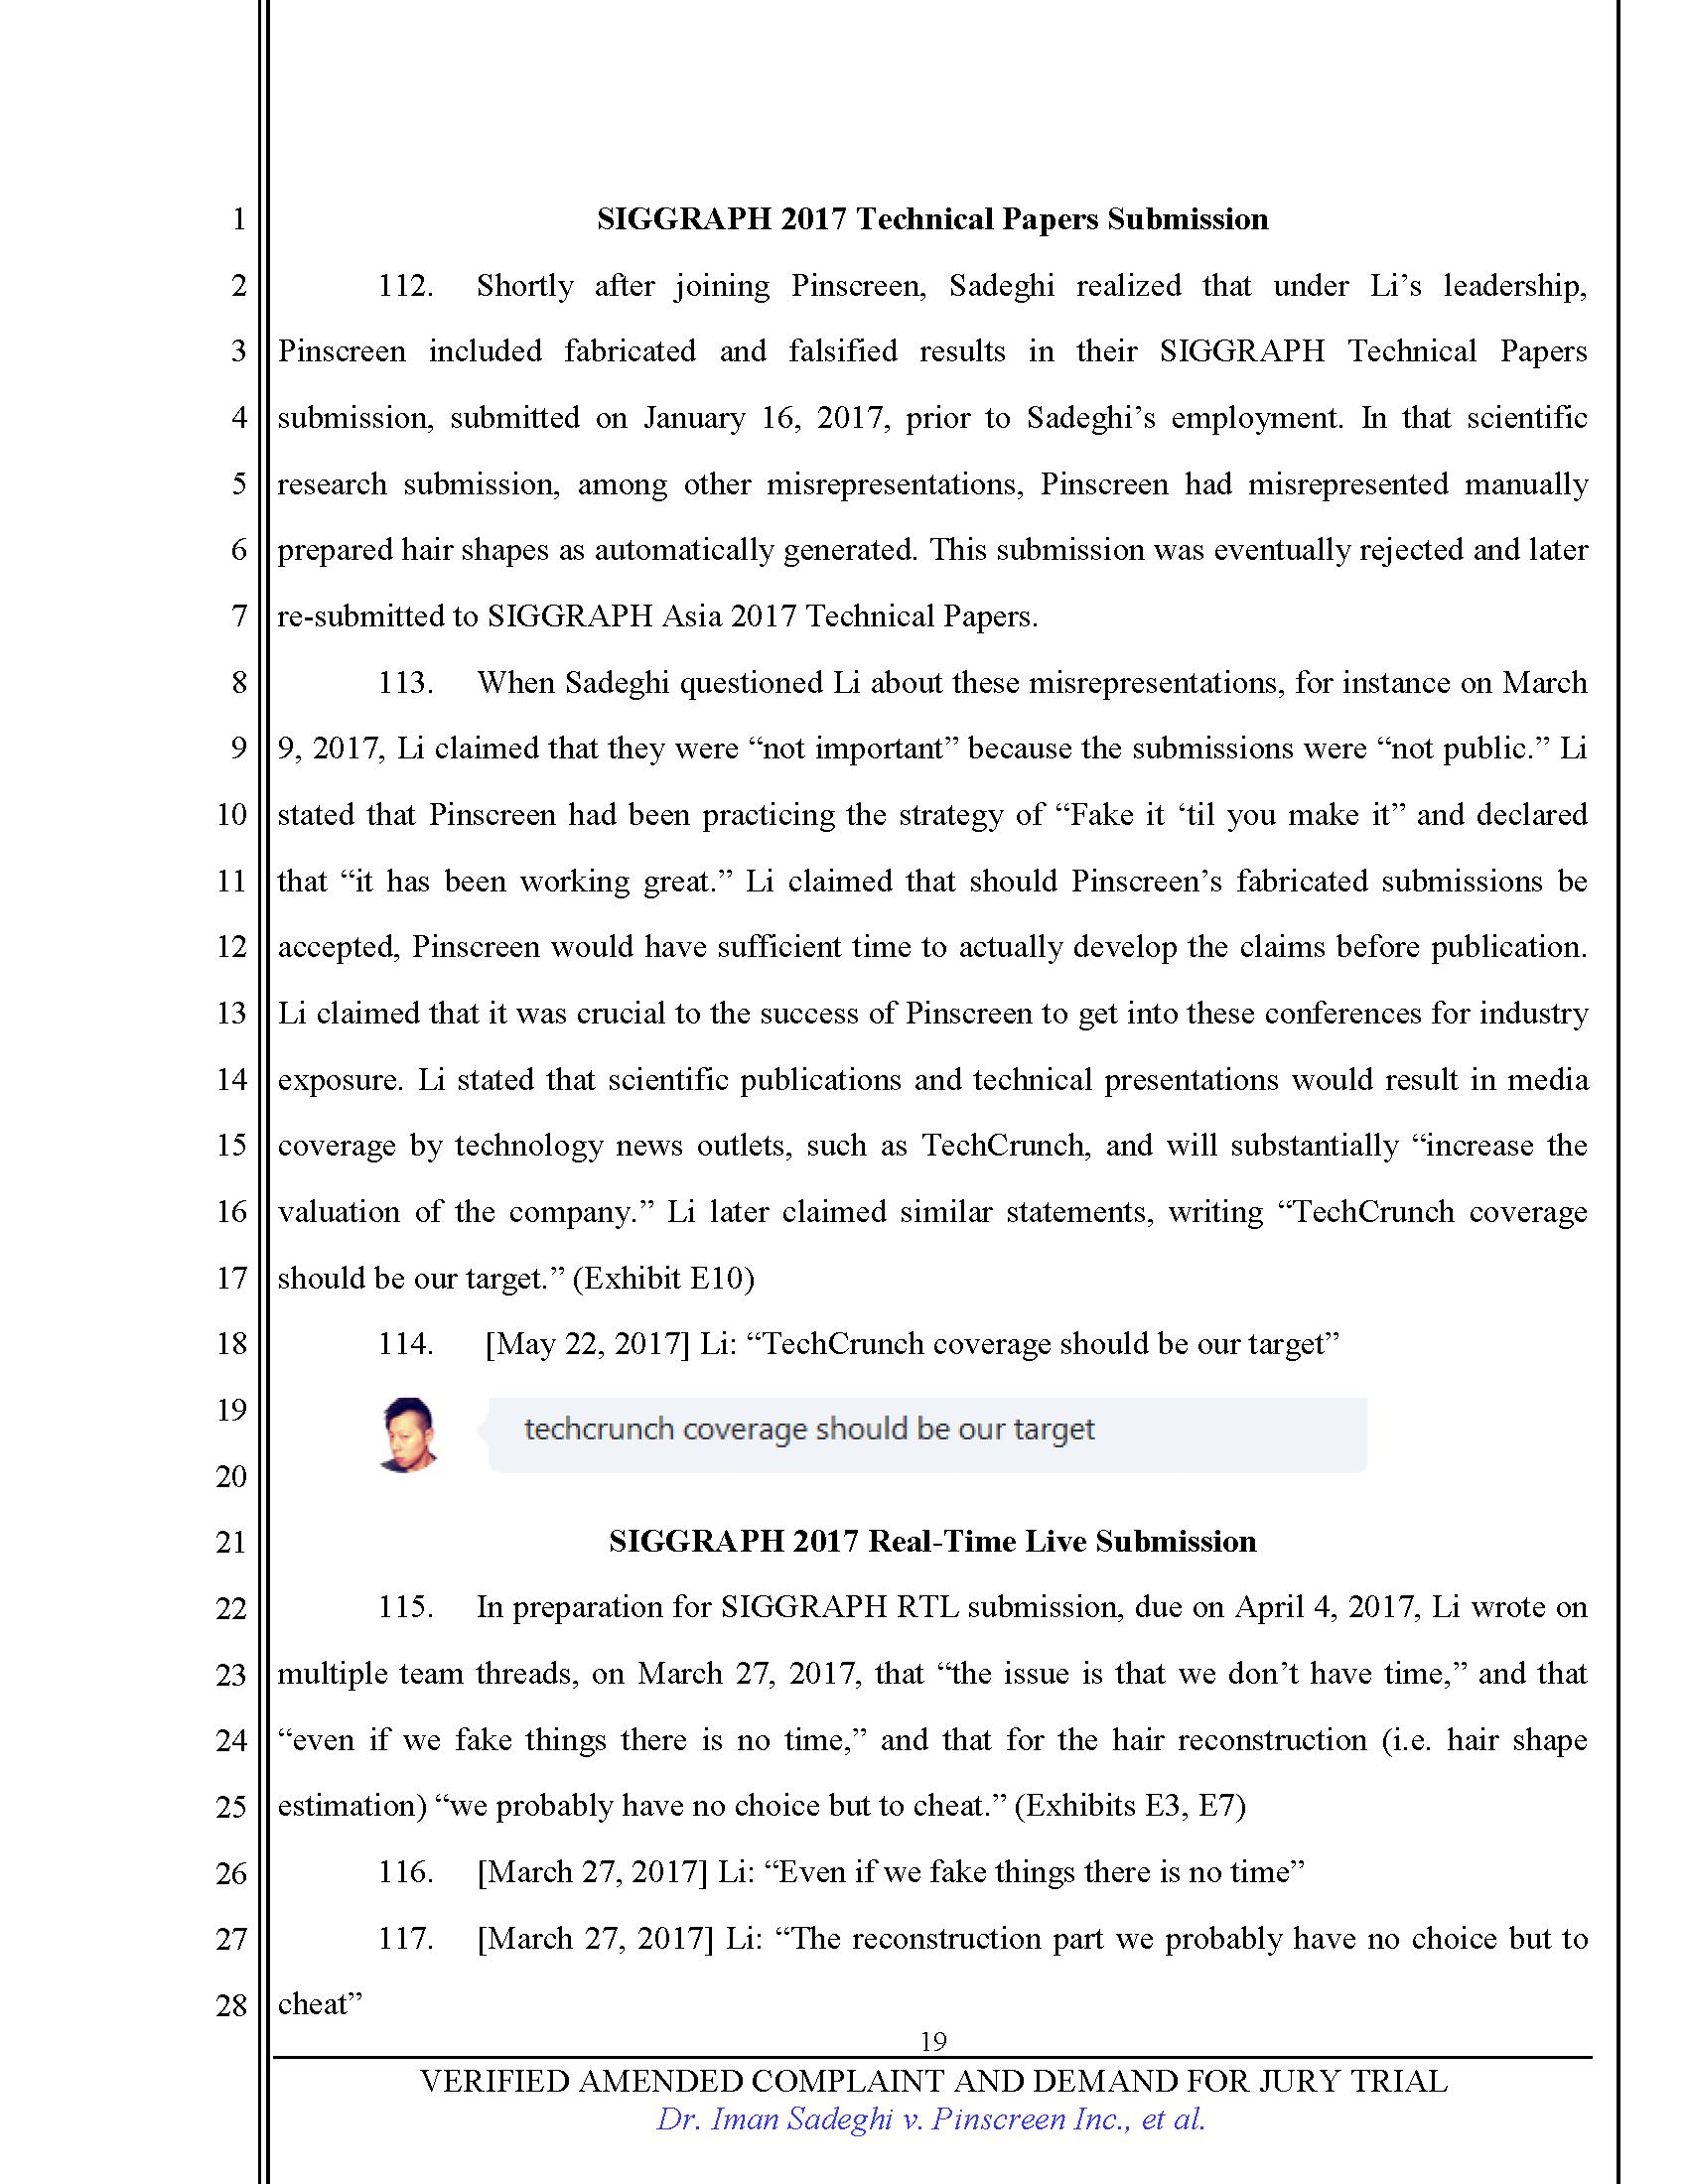 First Amended Complaint (FAC) Page 19